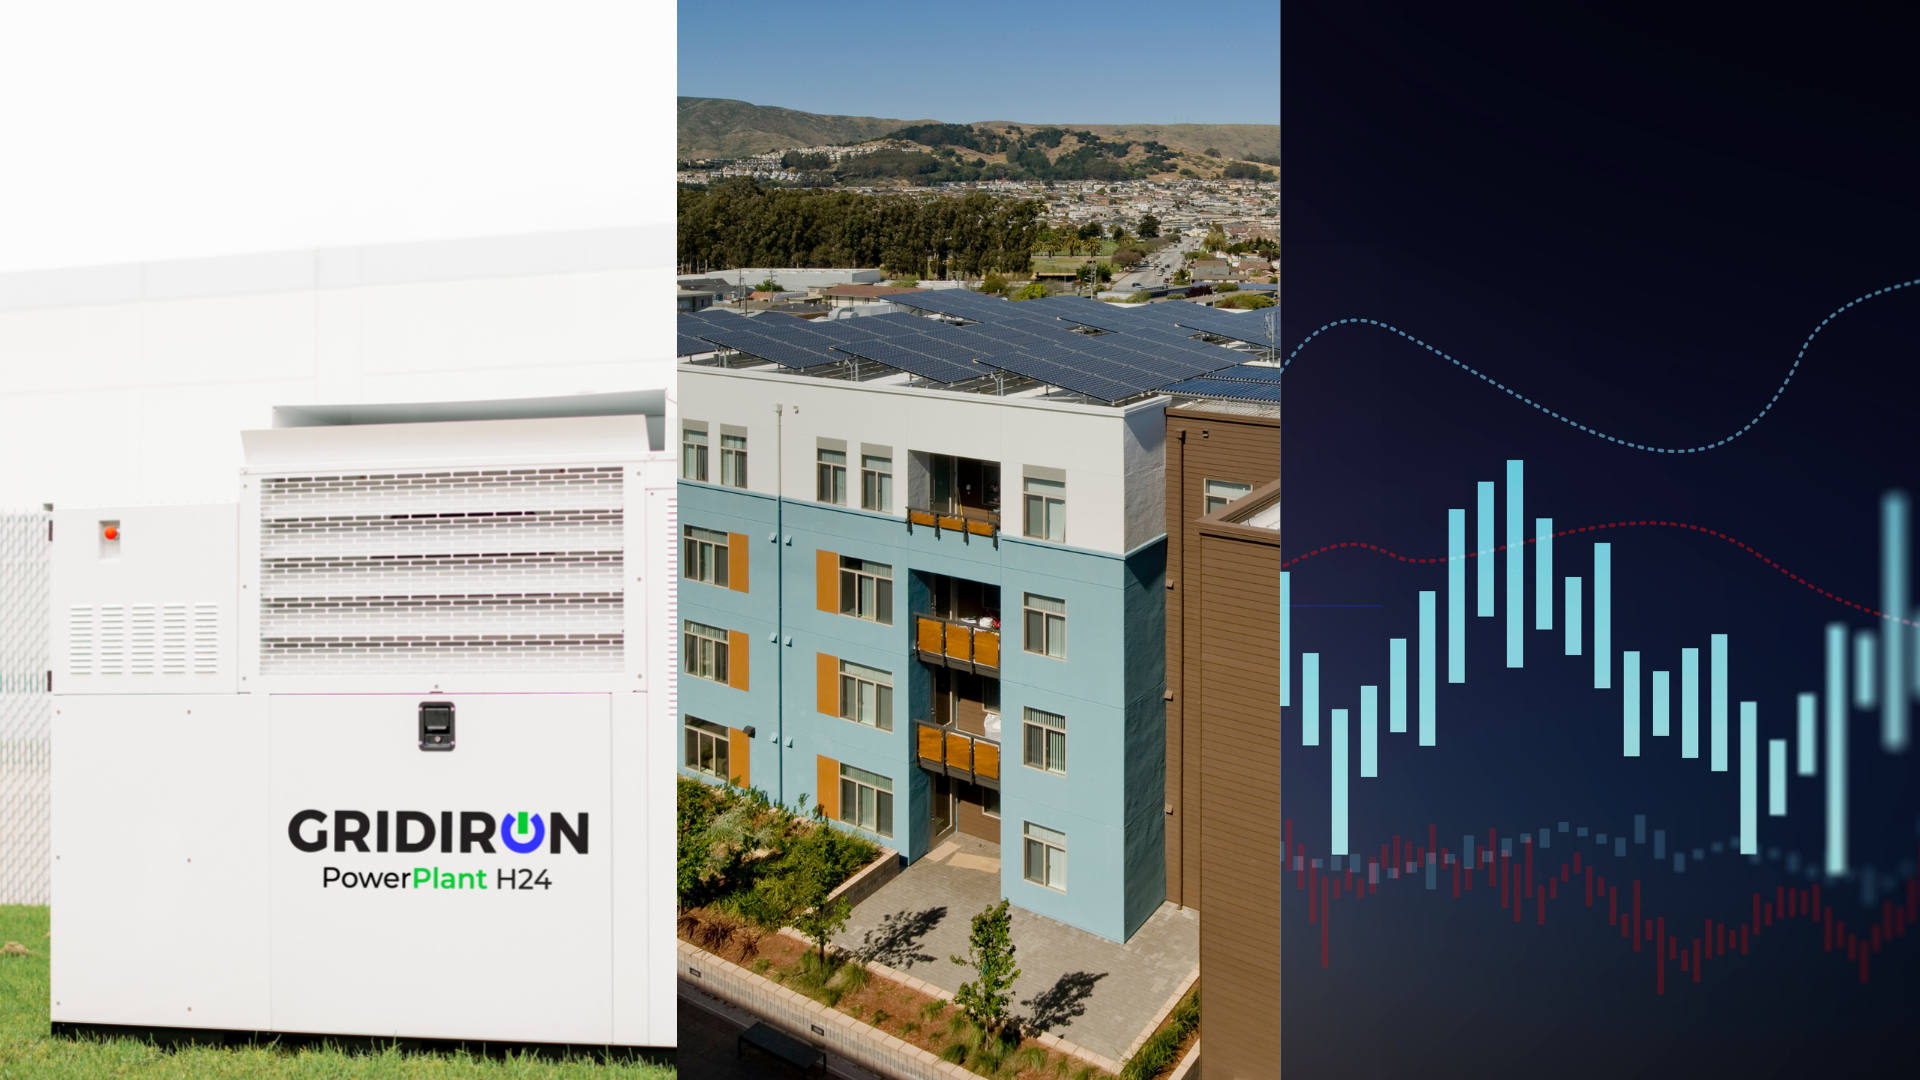 Collage of distributed energy resources included PowerPlant H24 unit, solar panels, demand response graph.